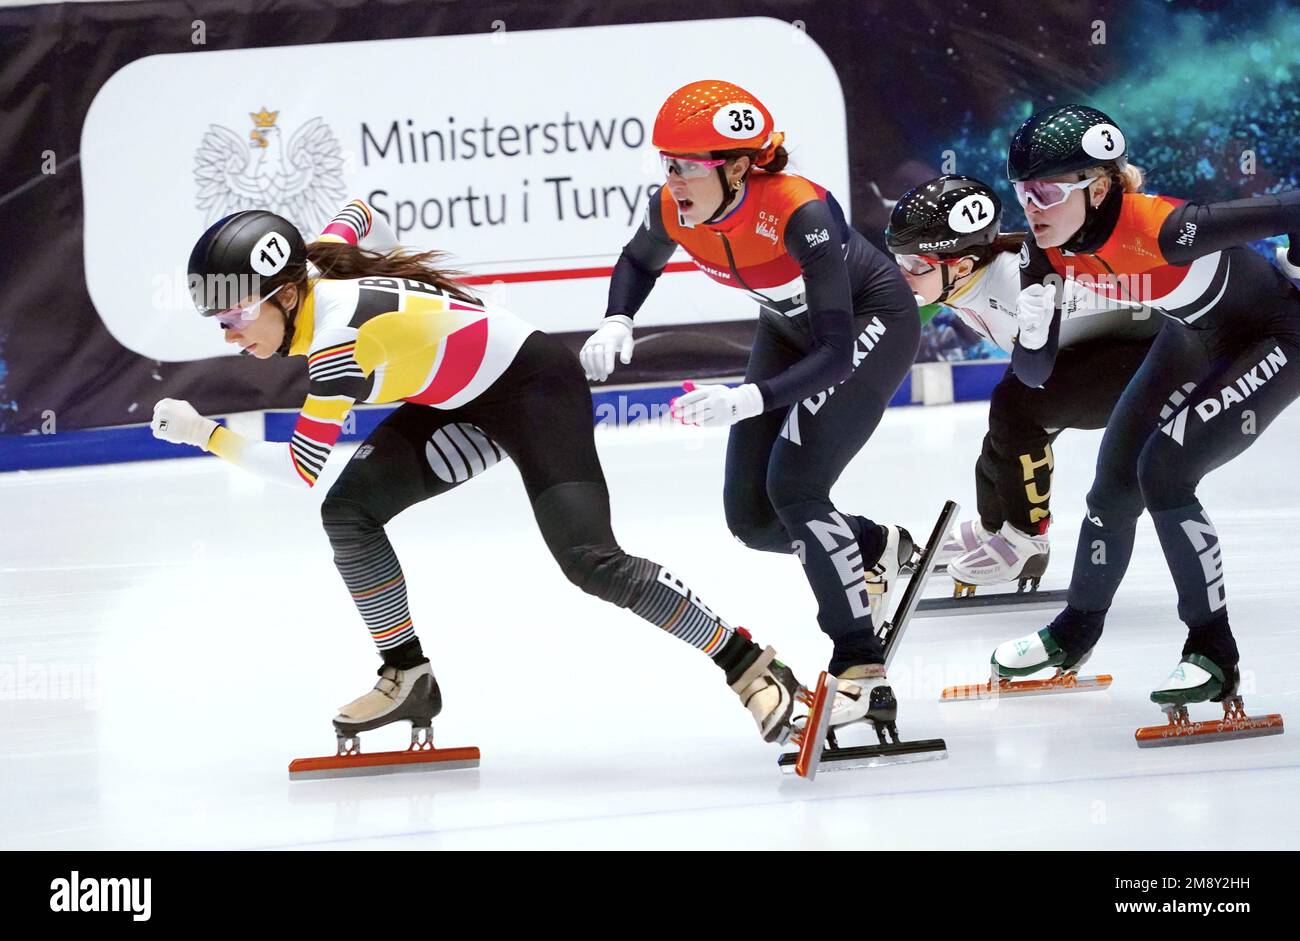 Hanne Desmet (BEL) finishes first before Suzanne Schulting (NED) on 1000m  women during ISU European Championships Short Track on January 15, 2023 in  Hala Olivia in Gdansk, Poland Credit: SCS/Soenar Chamid/AFLO/Alamy Live